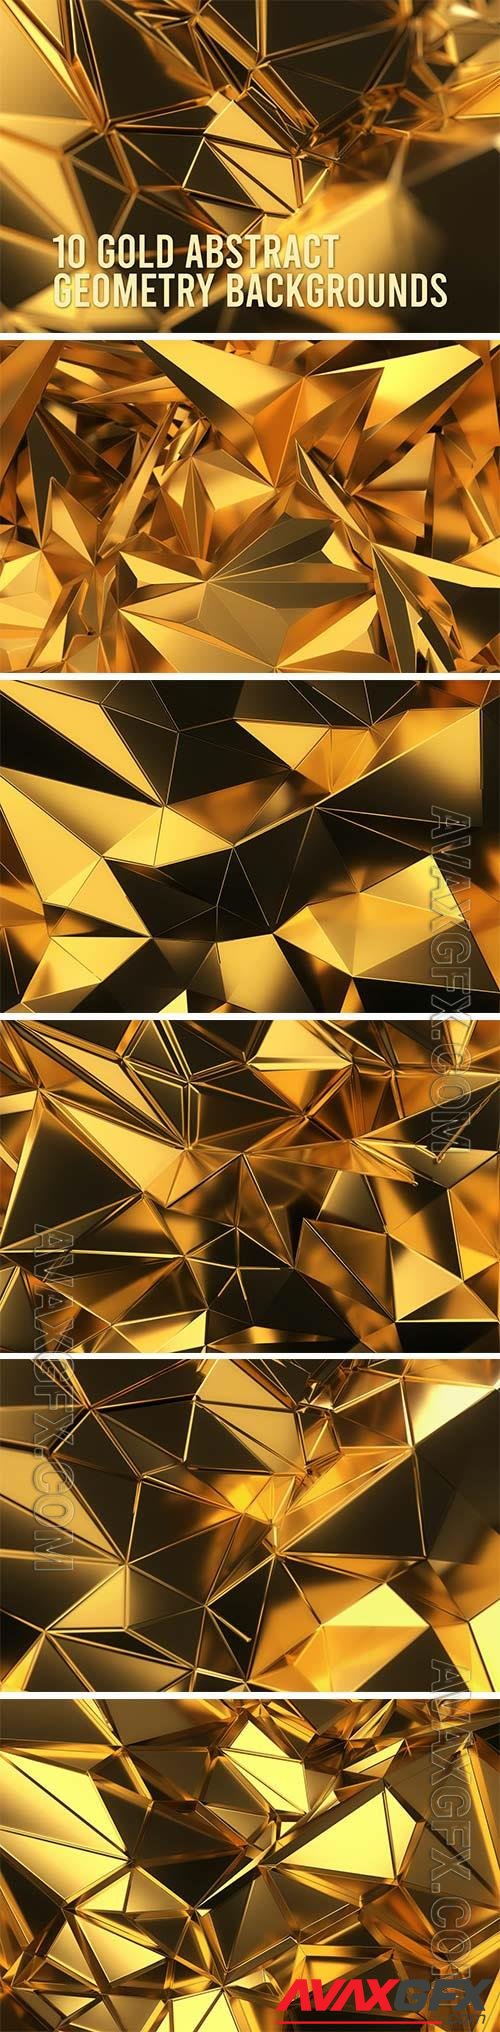 Gold Abstract Geometry Backgrounds